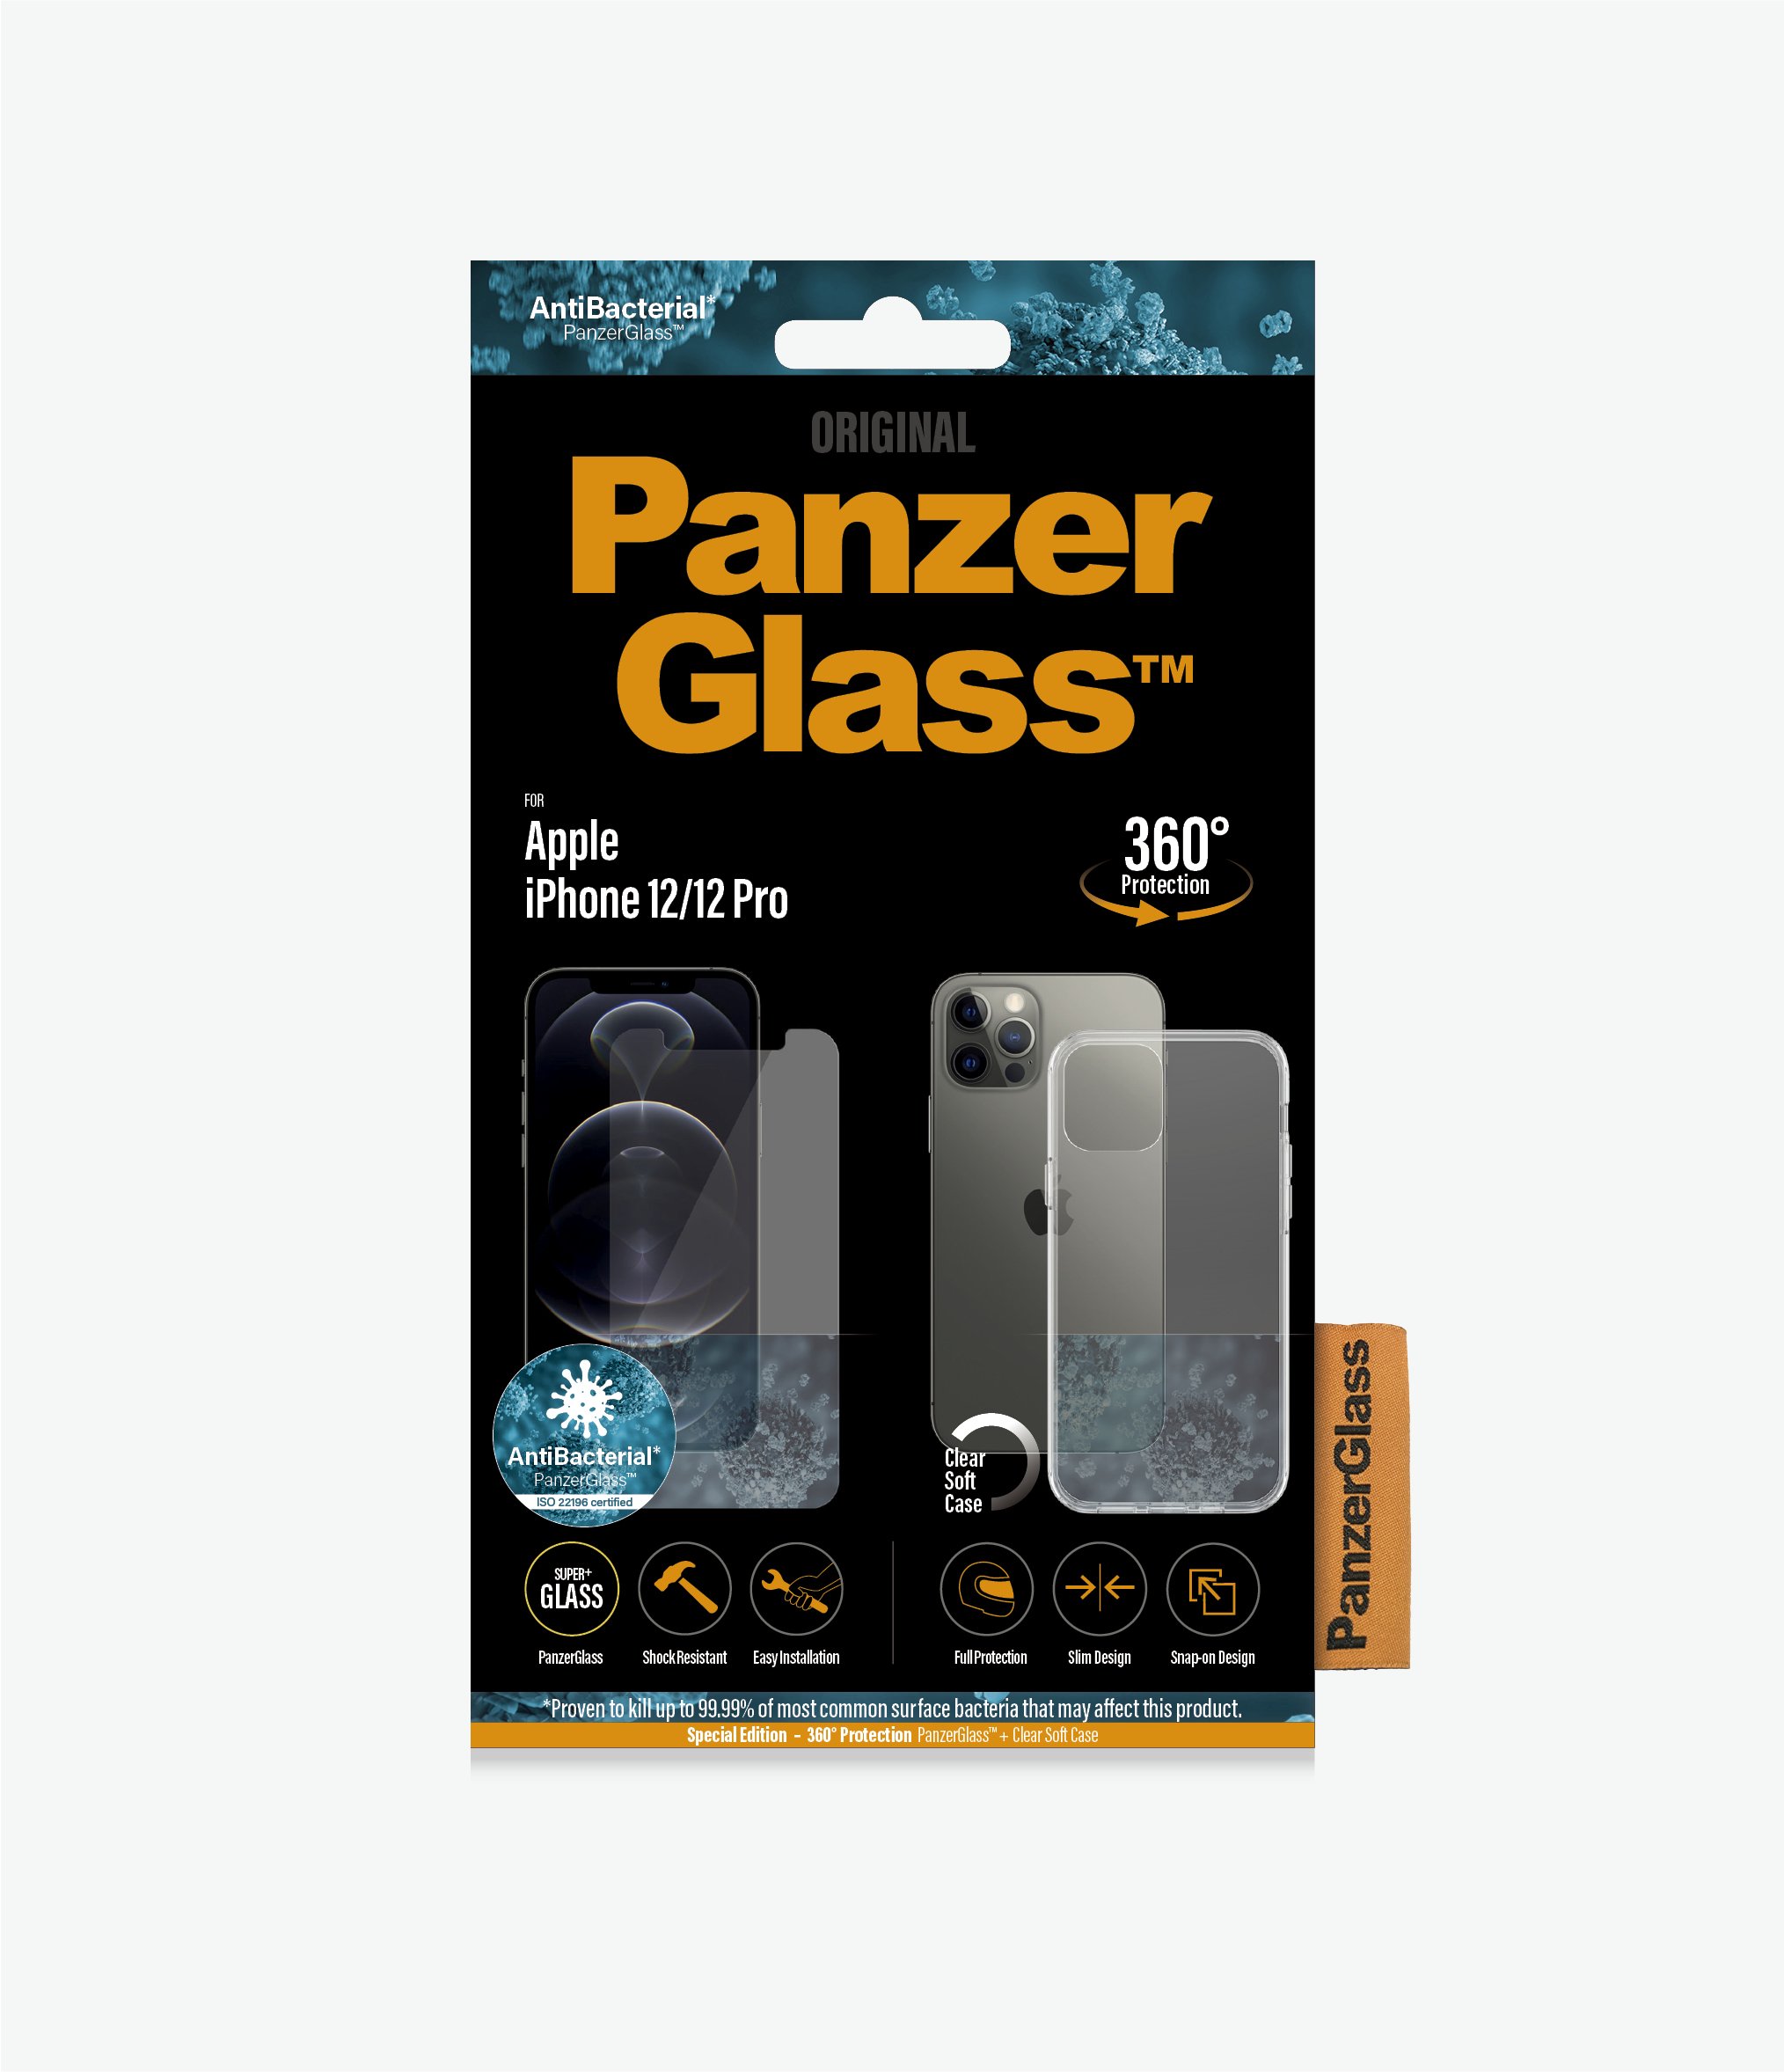 PanzerGlass™ Apple iPhone 12/12 Pro Clear Glass (2708) - Screen Protector - Resistant to scratches and bacteria, Shock absorbing, 100% touch